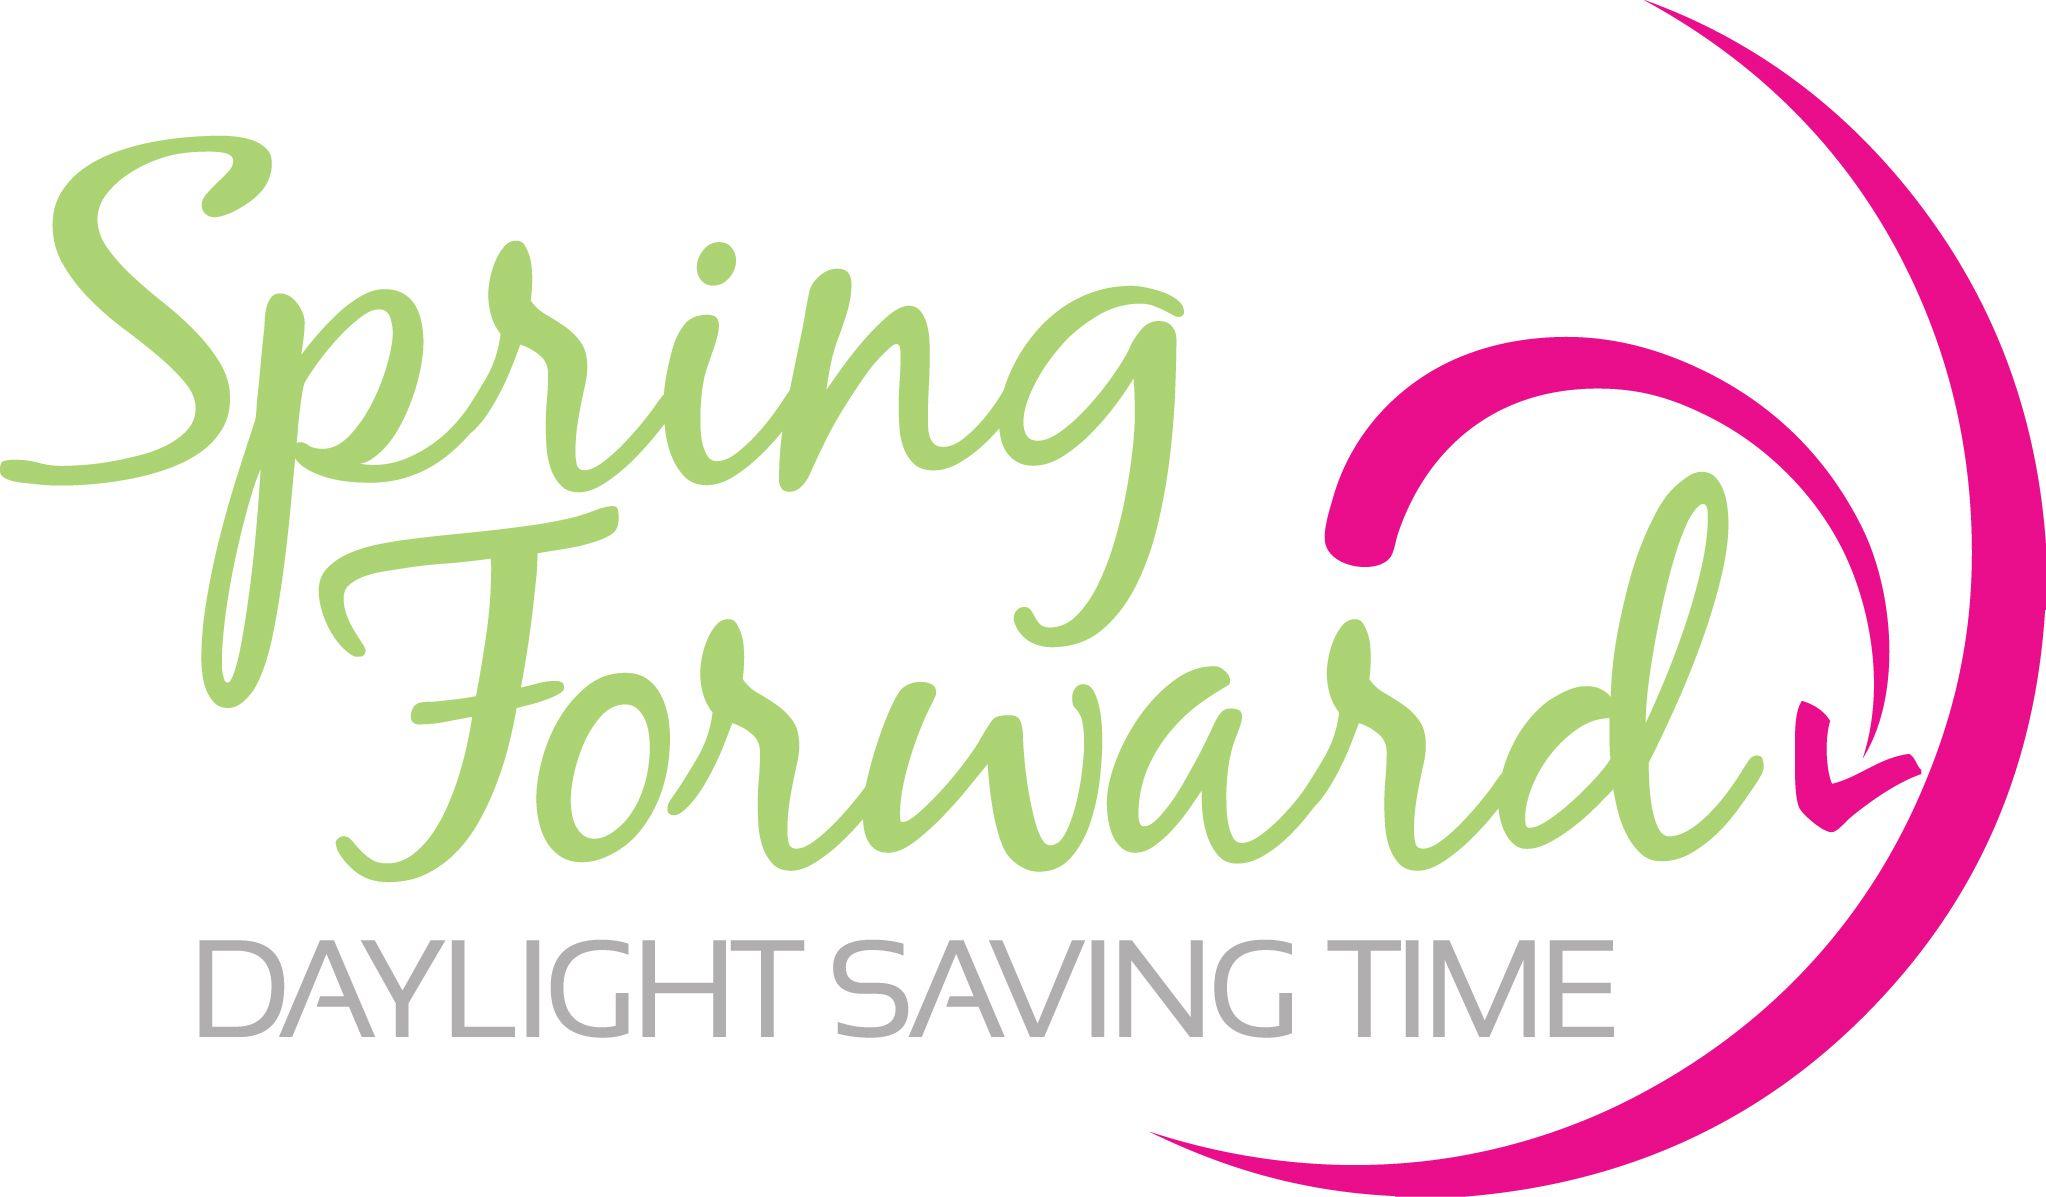 Clipart daylight free savings time Collection. Daylight